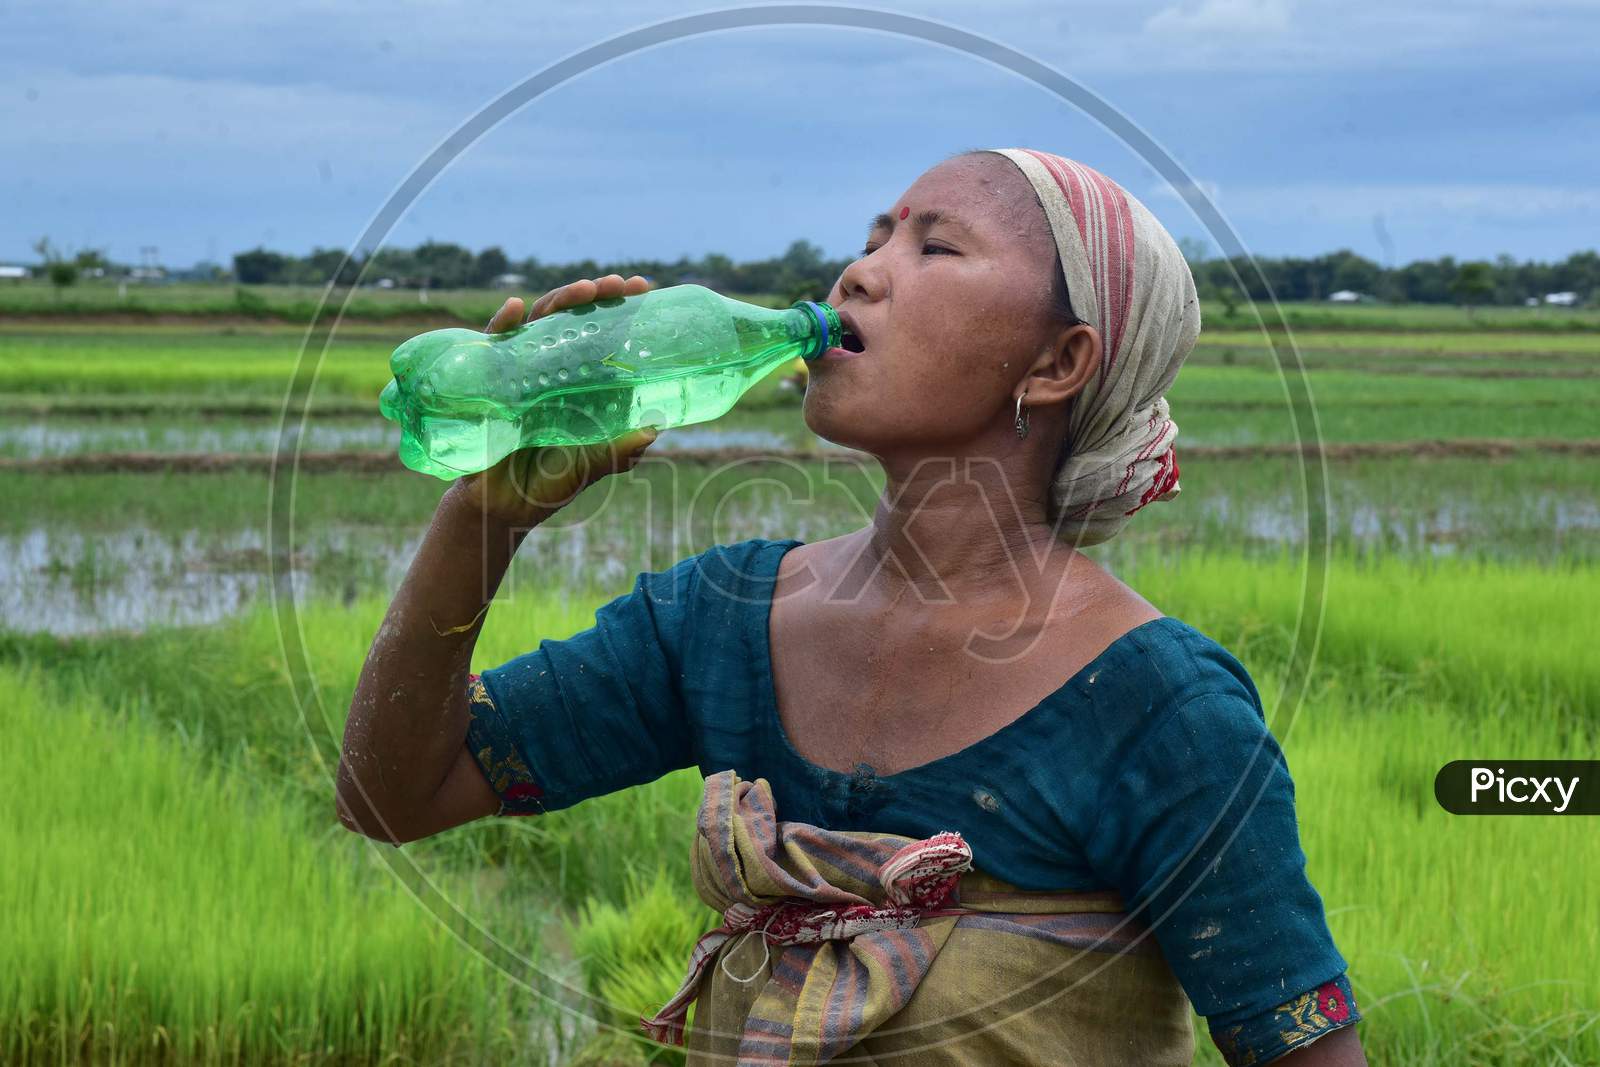 A woman quenches her thirst by drinking water after working in a paddy field in Nagaon, Assam on July 11, 2020